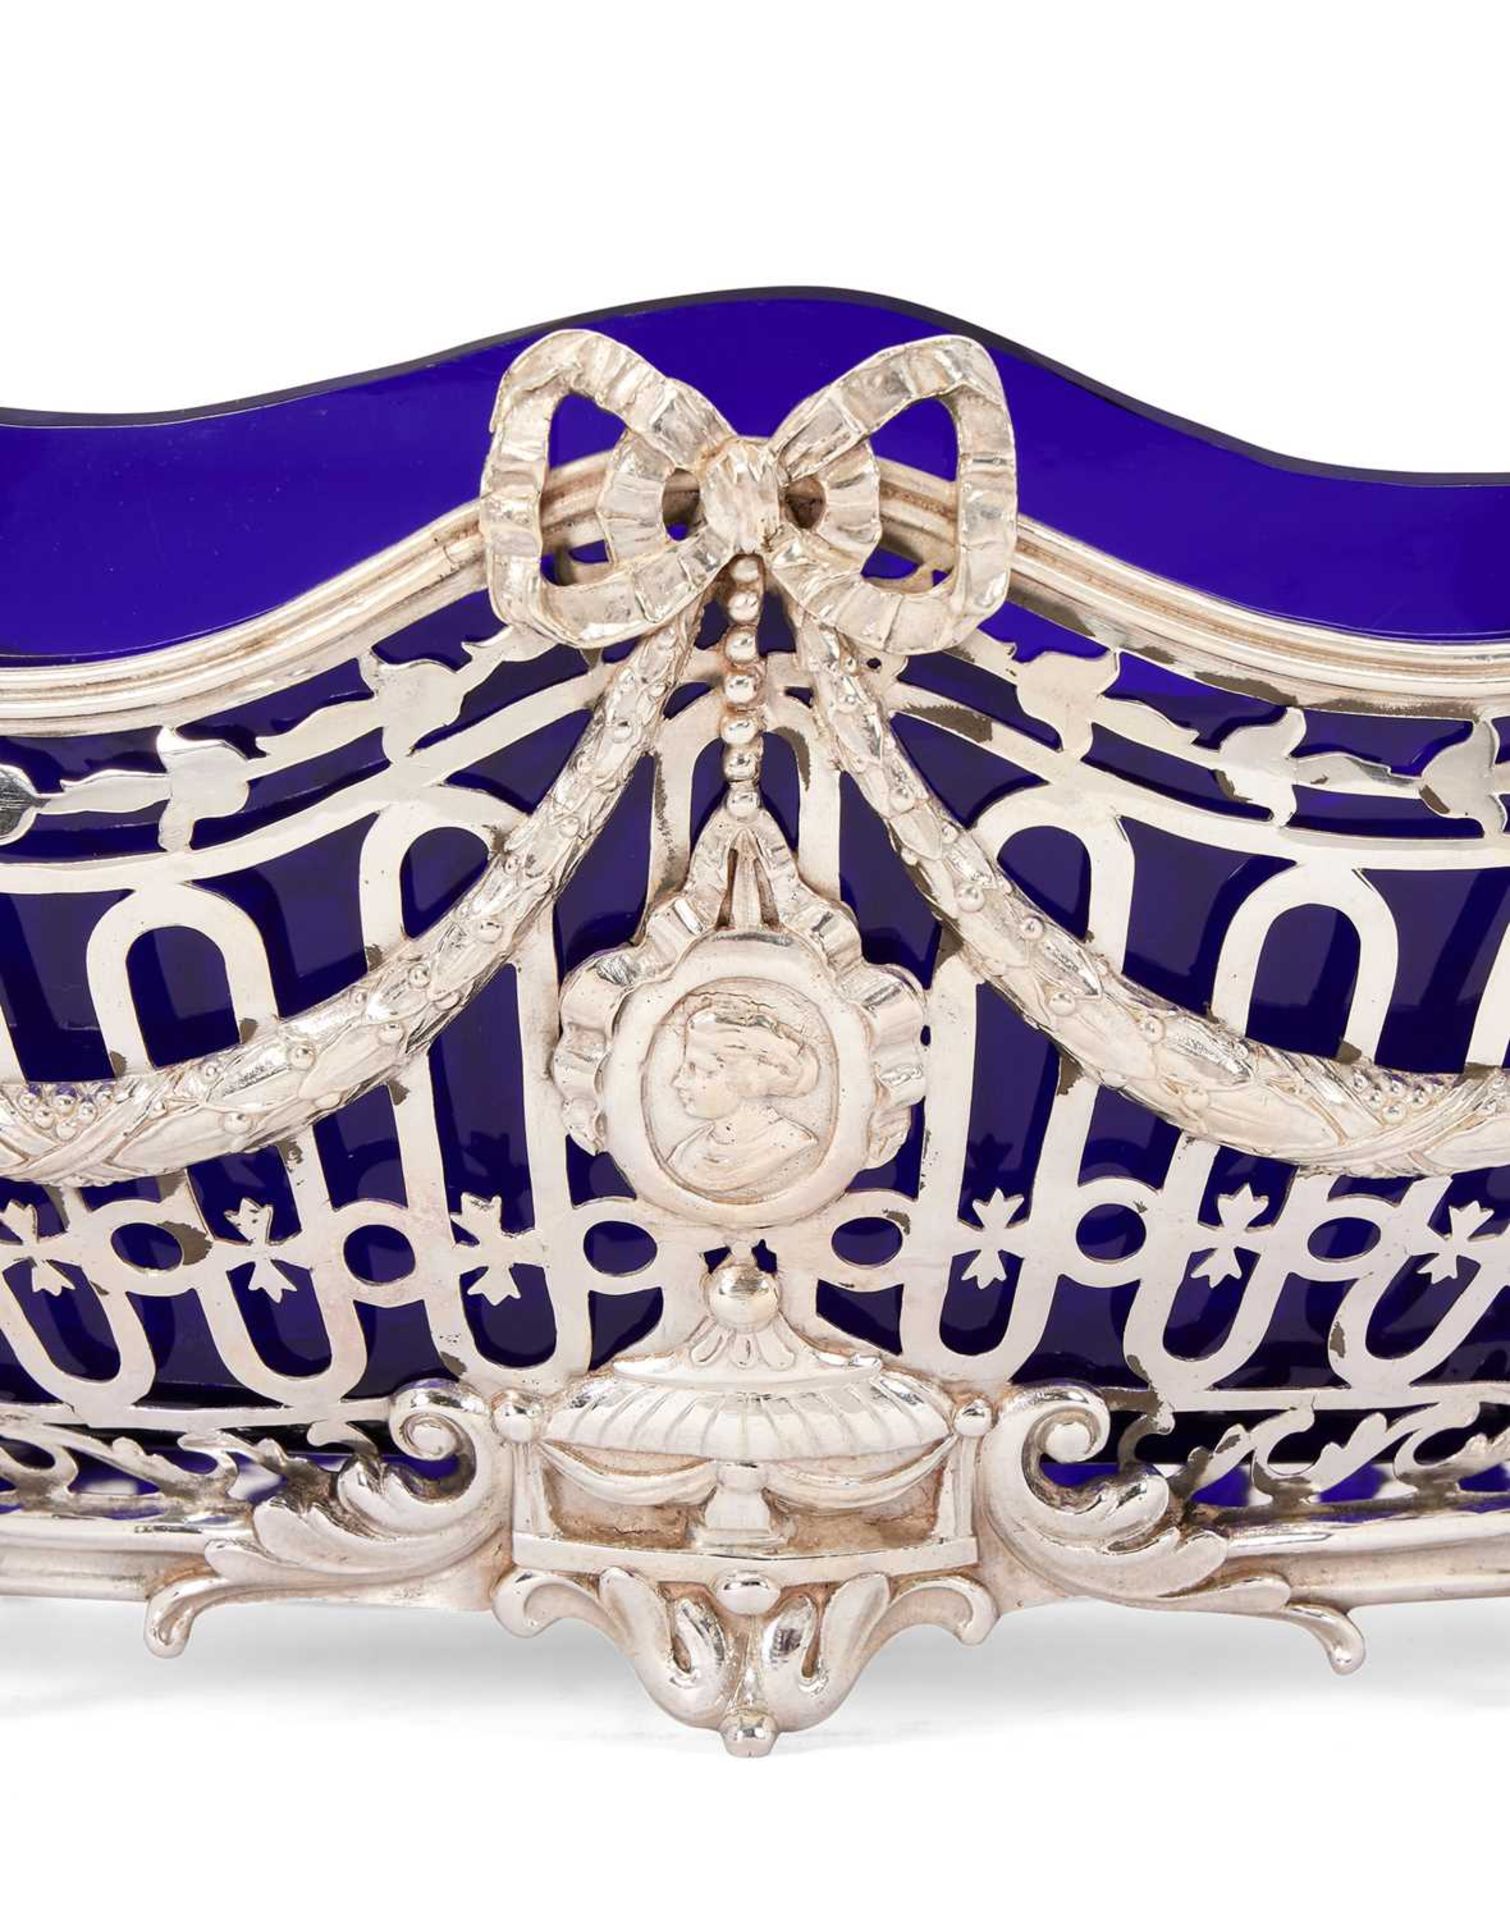 A LARGE LATE 19TH CENTURY GERMAN SILVER AND BLUE GLASS CENTREPIECE - Image 2 of 4